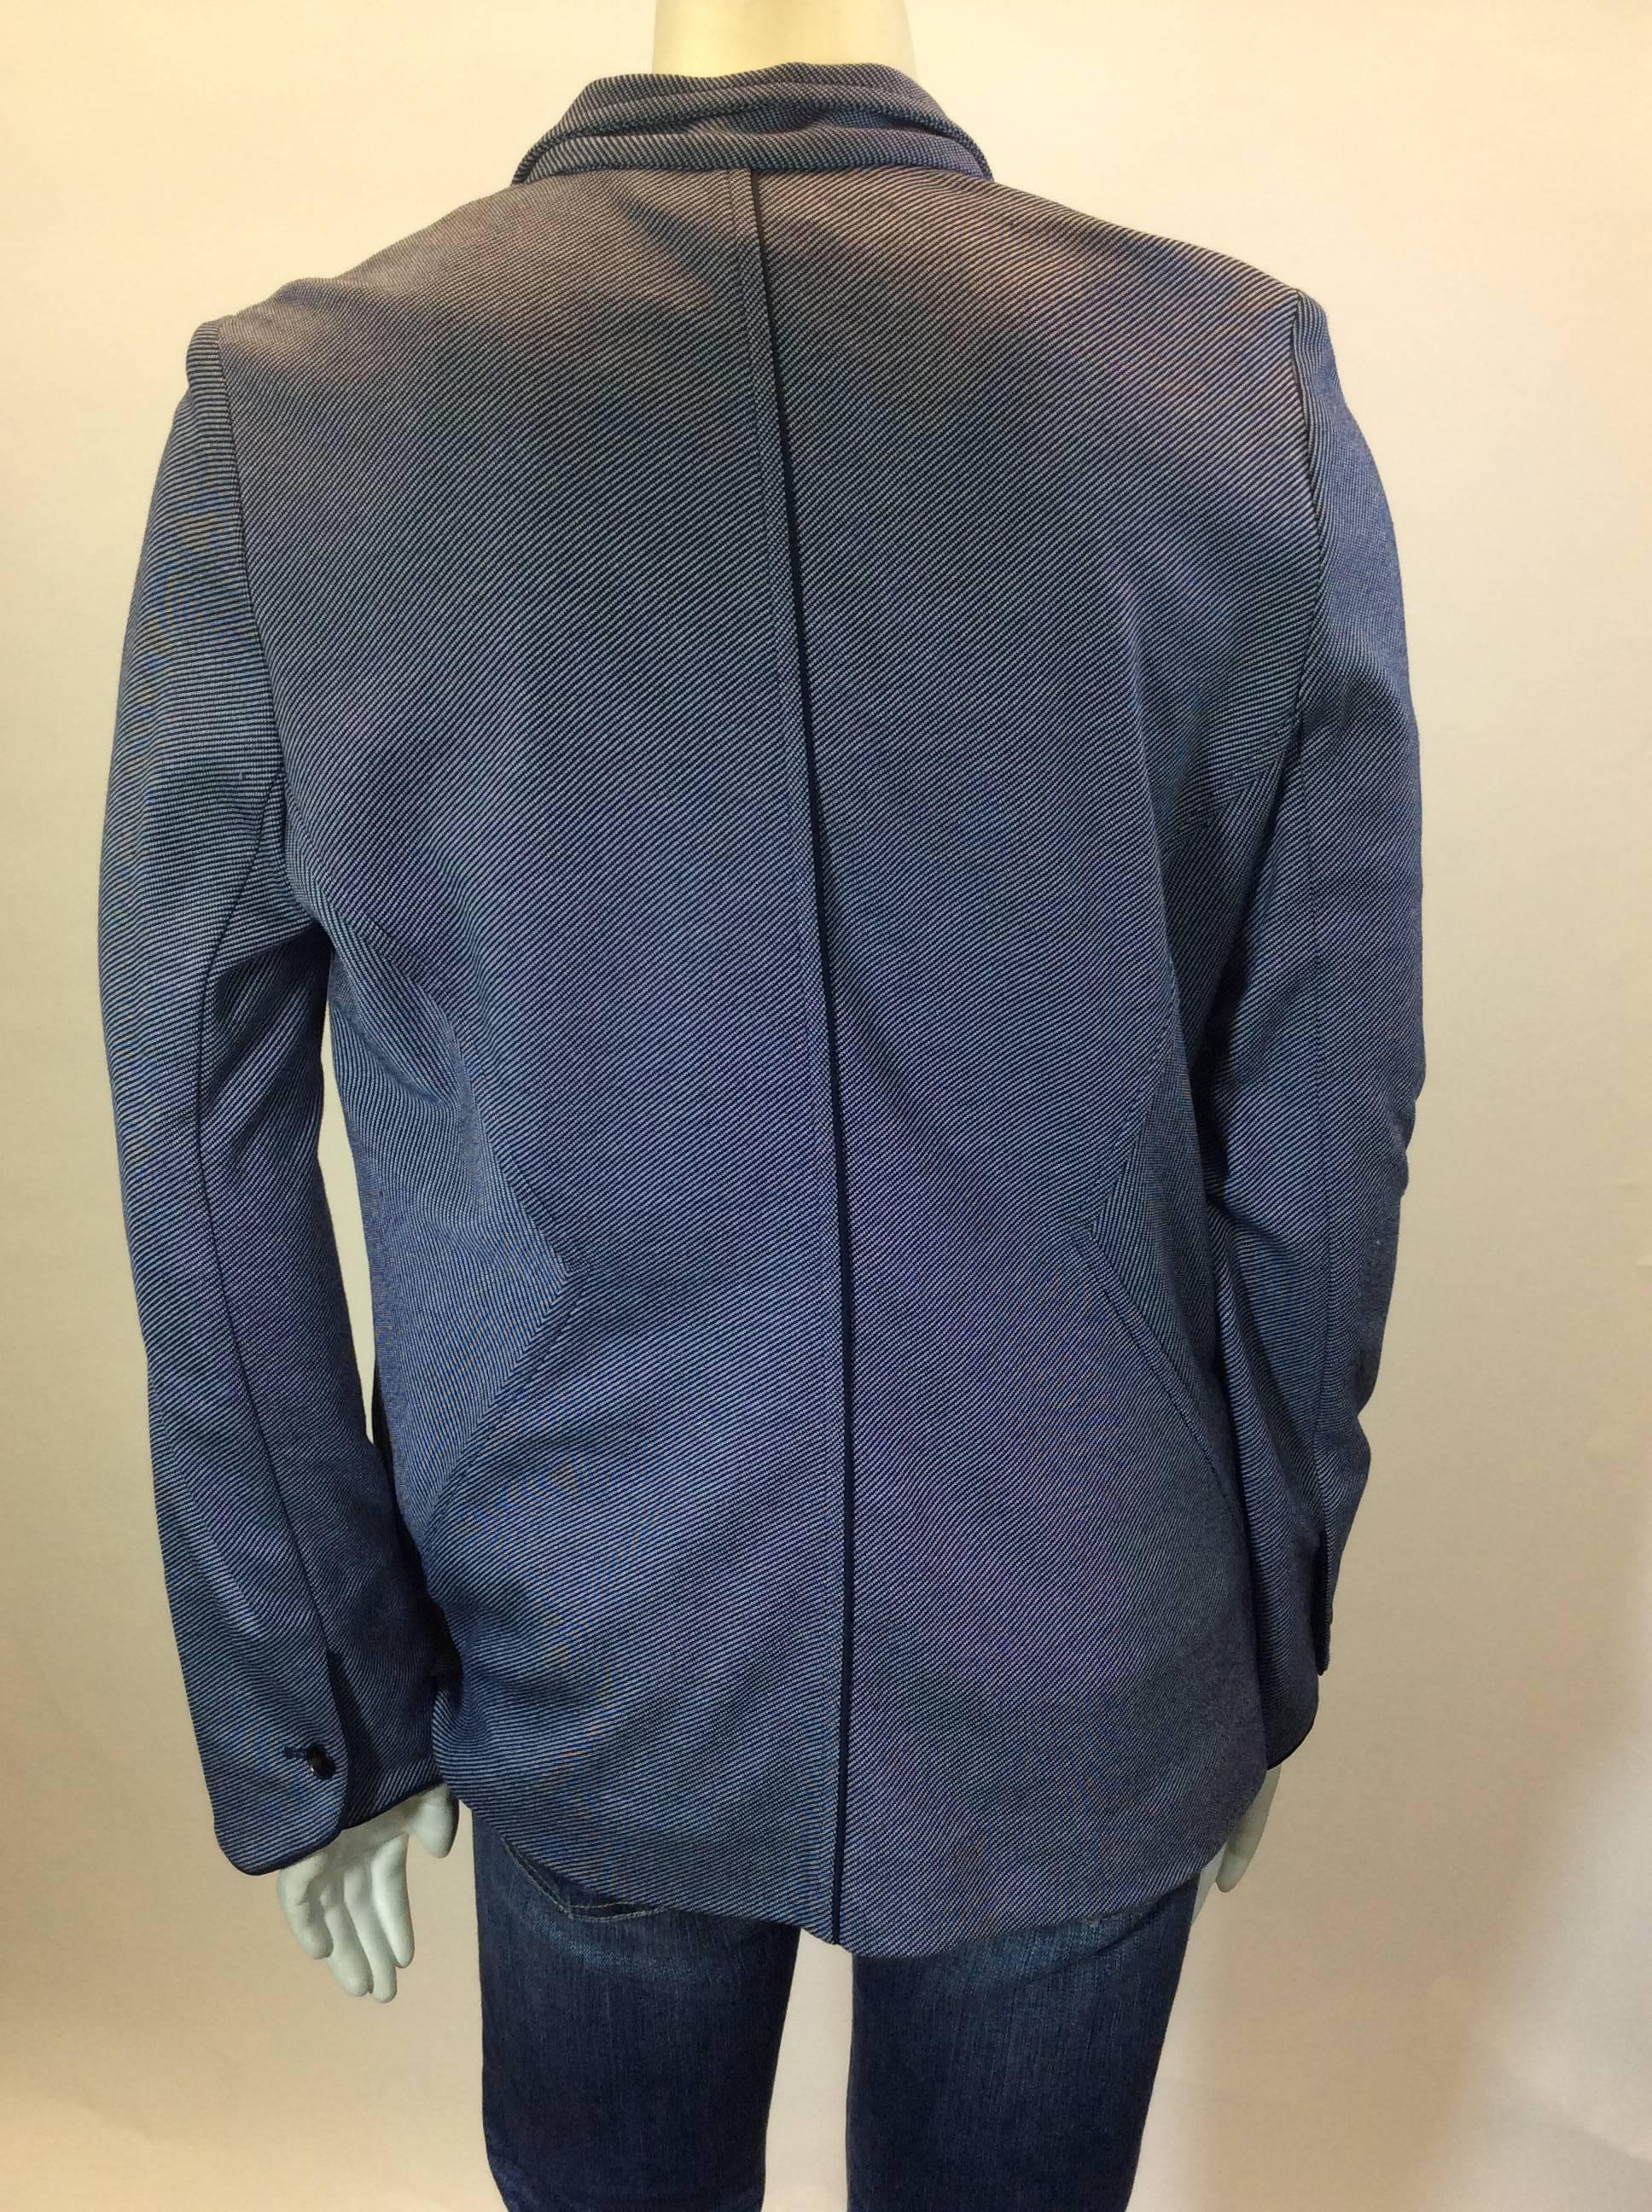 Loro Piana Navy Striped Blazer In Excellent Condition For Sale In Narberth, PA